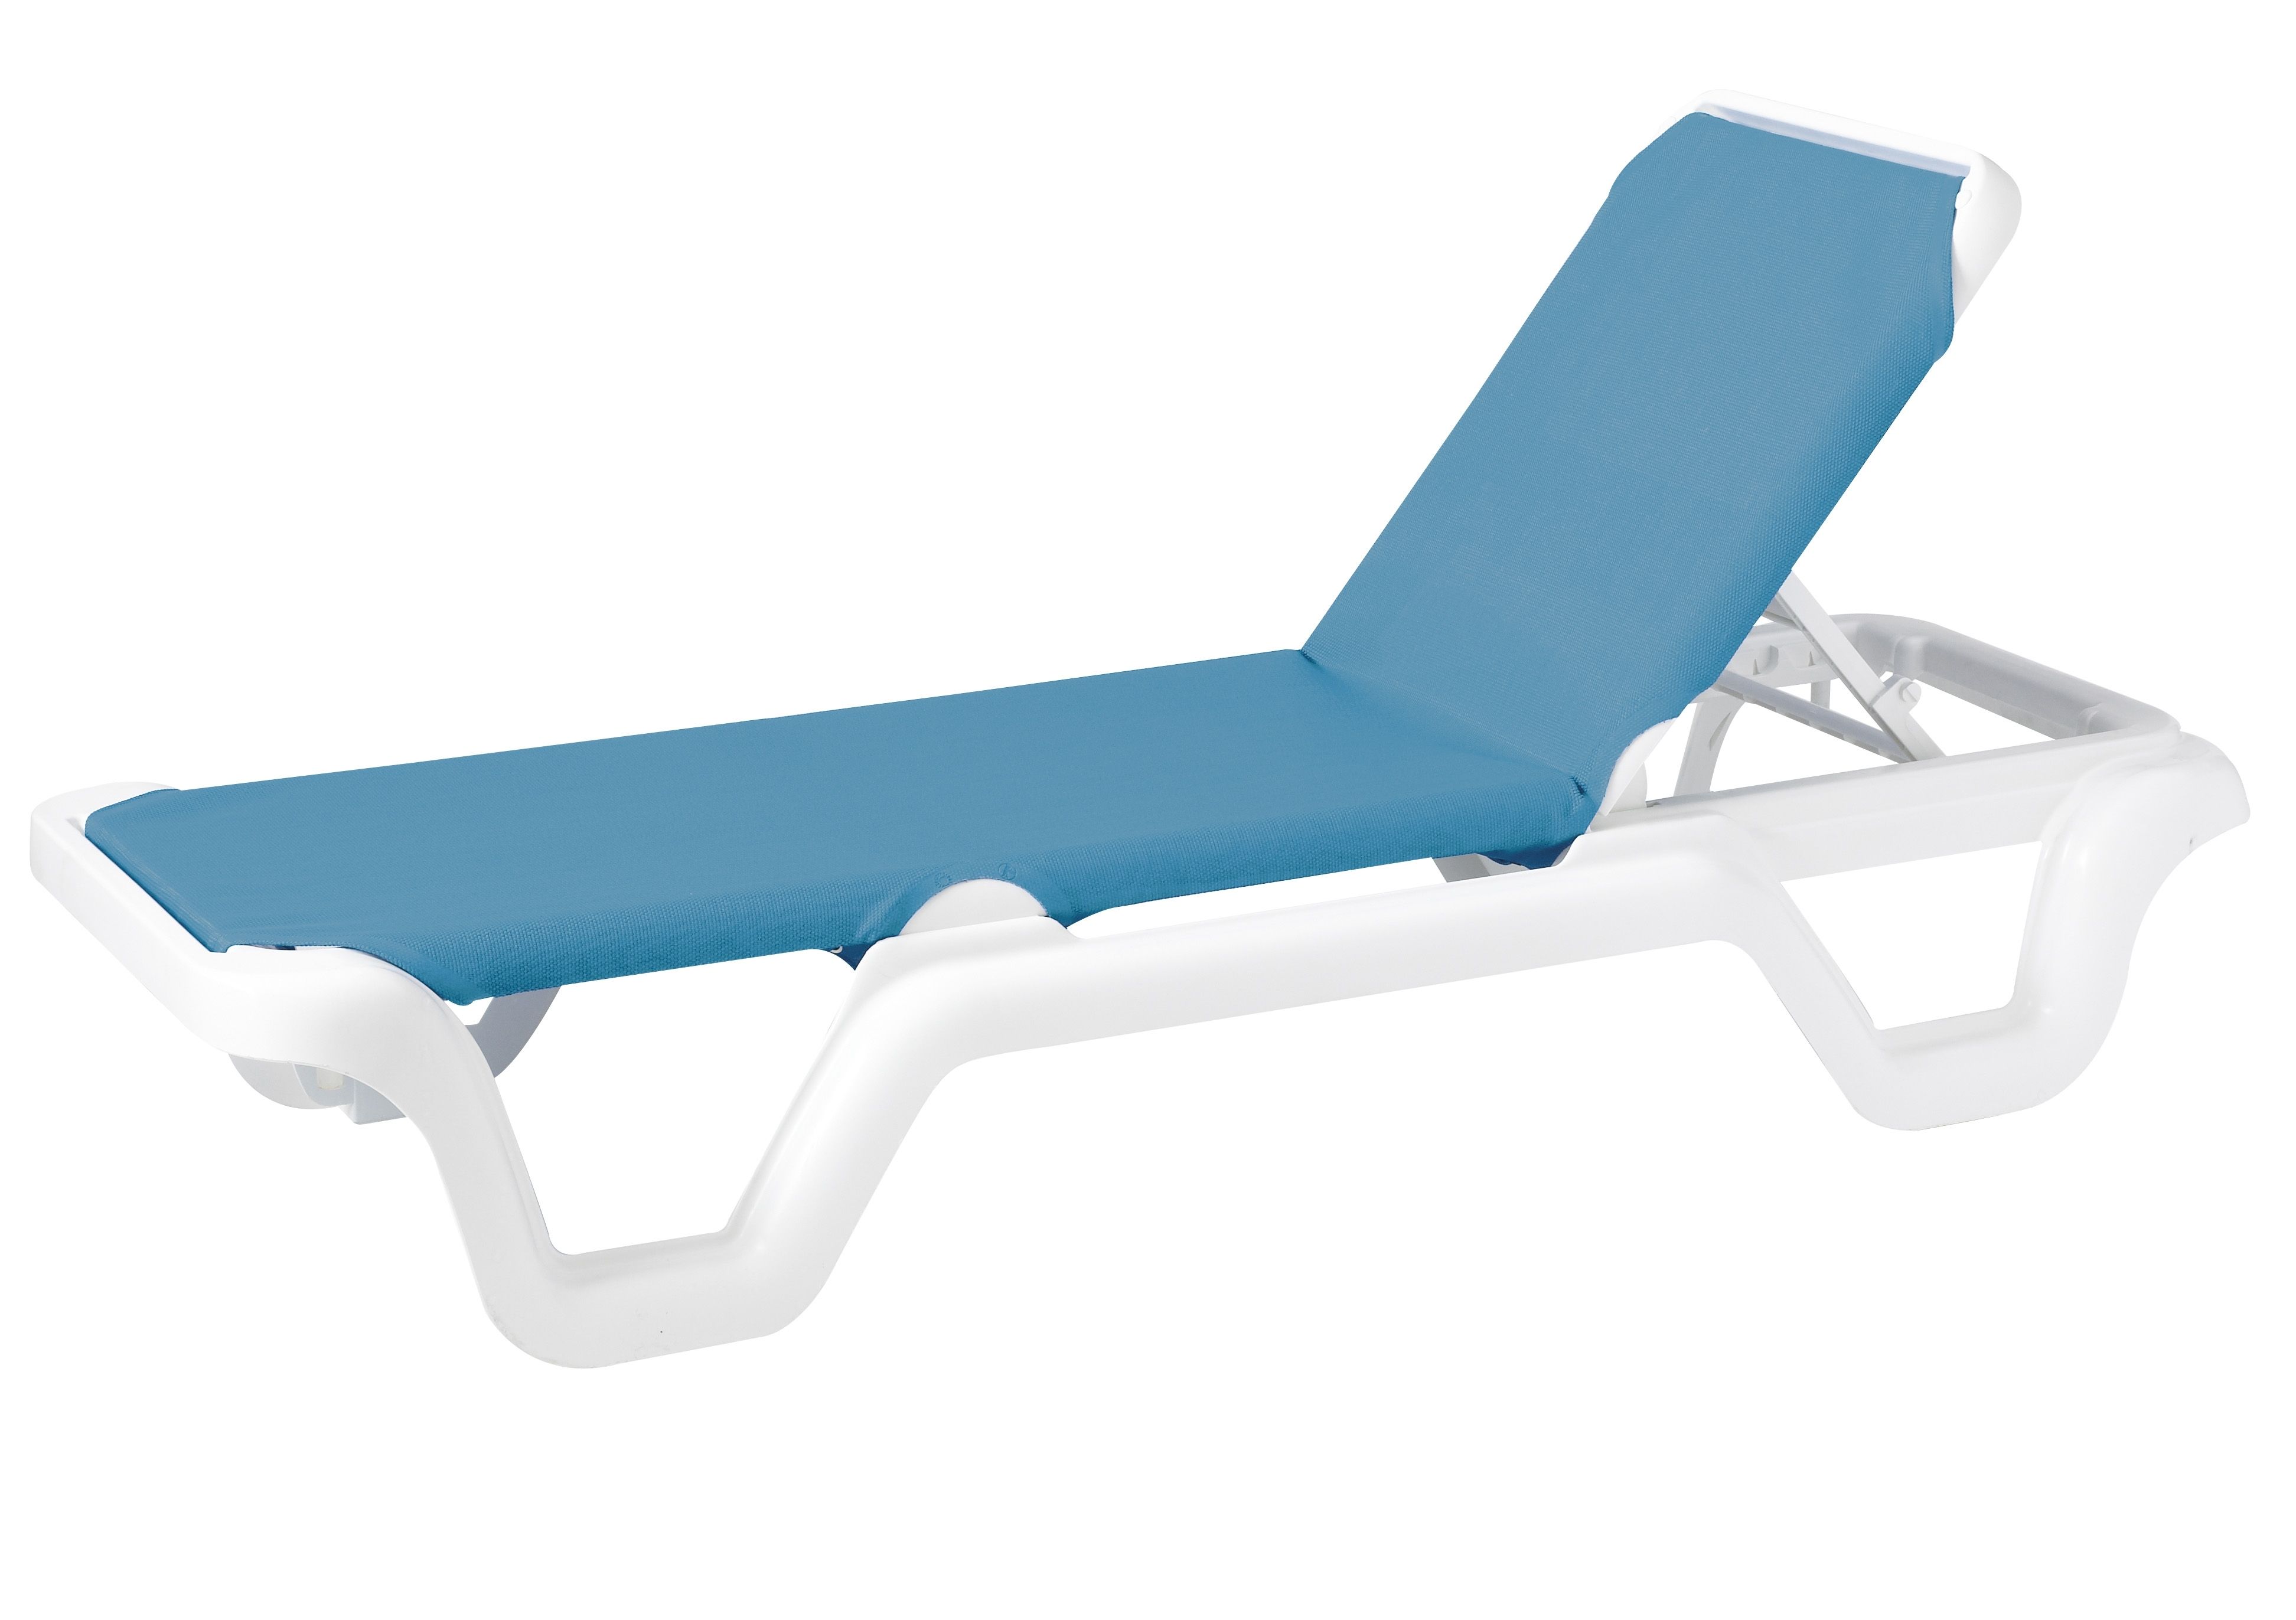 2018 Resin Chaise Lounges With Grosfillex Marina Style Resin Sling Chaise Lounge Chair W/o Arms (View 11 of 15)